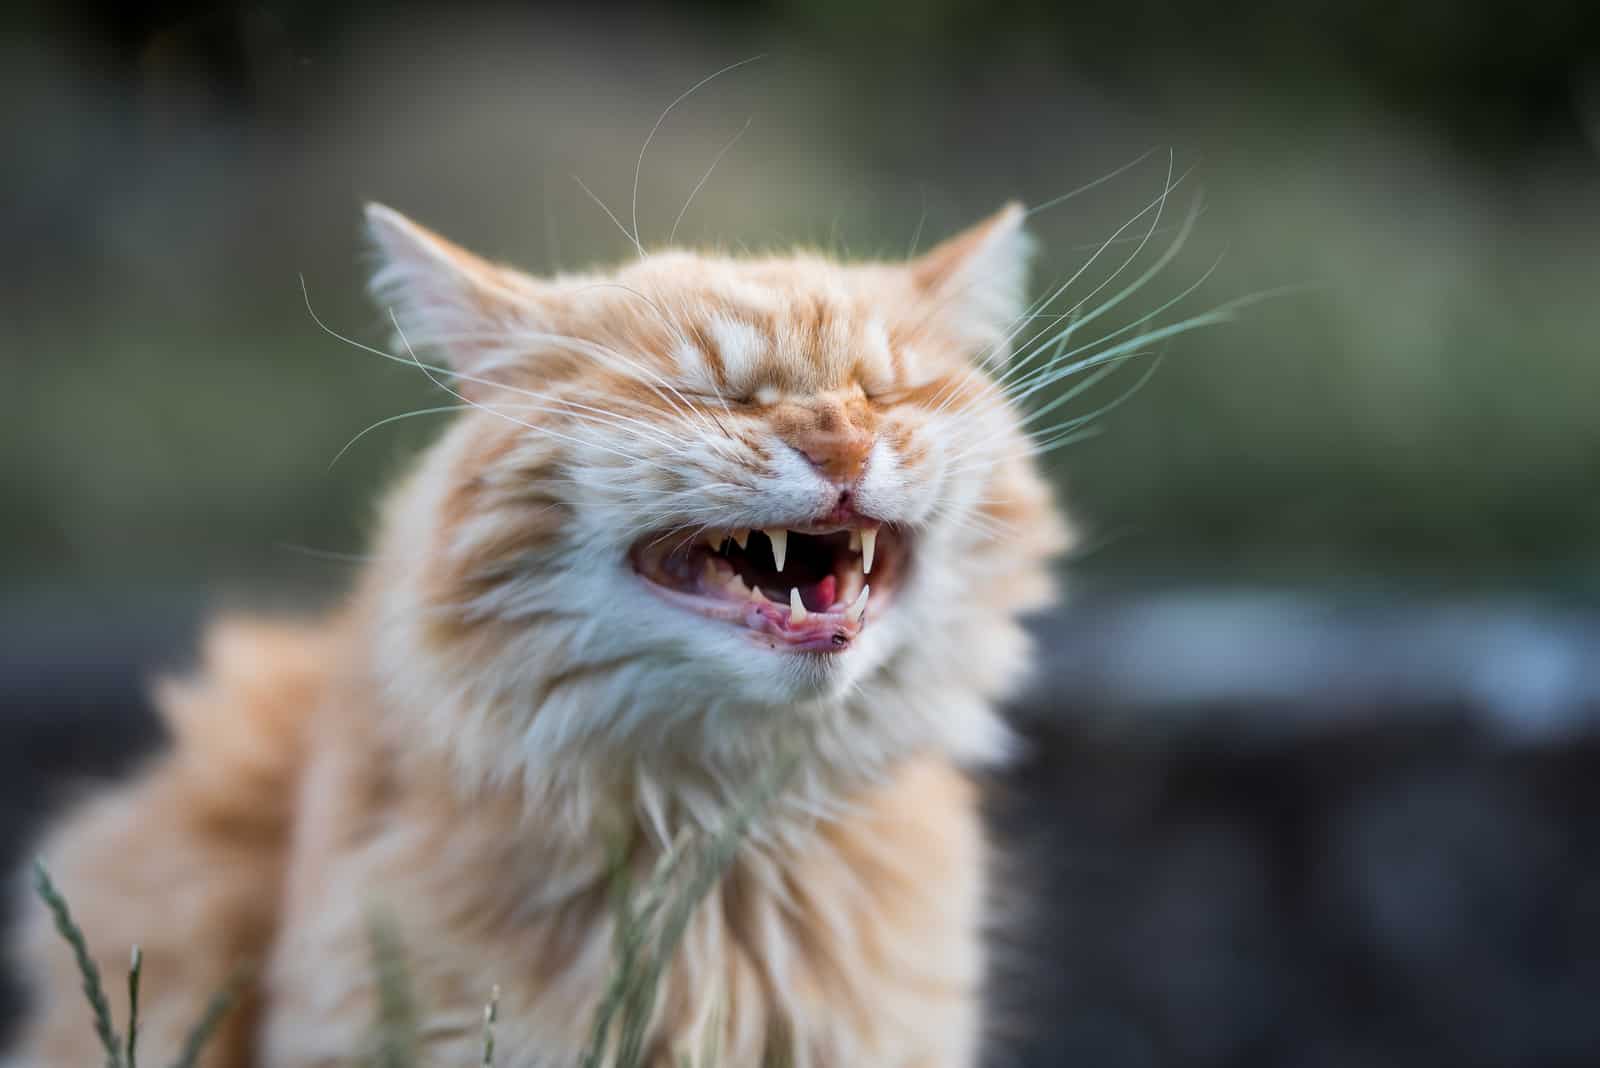 cat grinning while sitting in garden